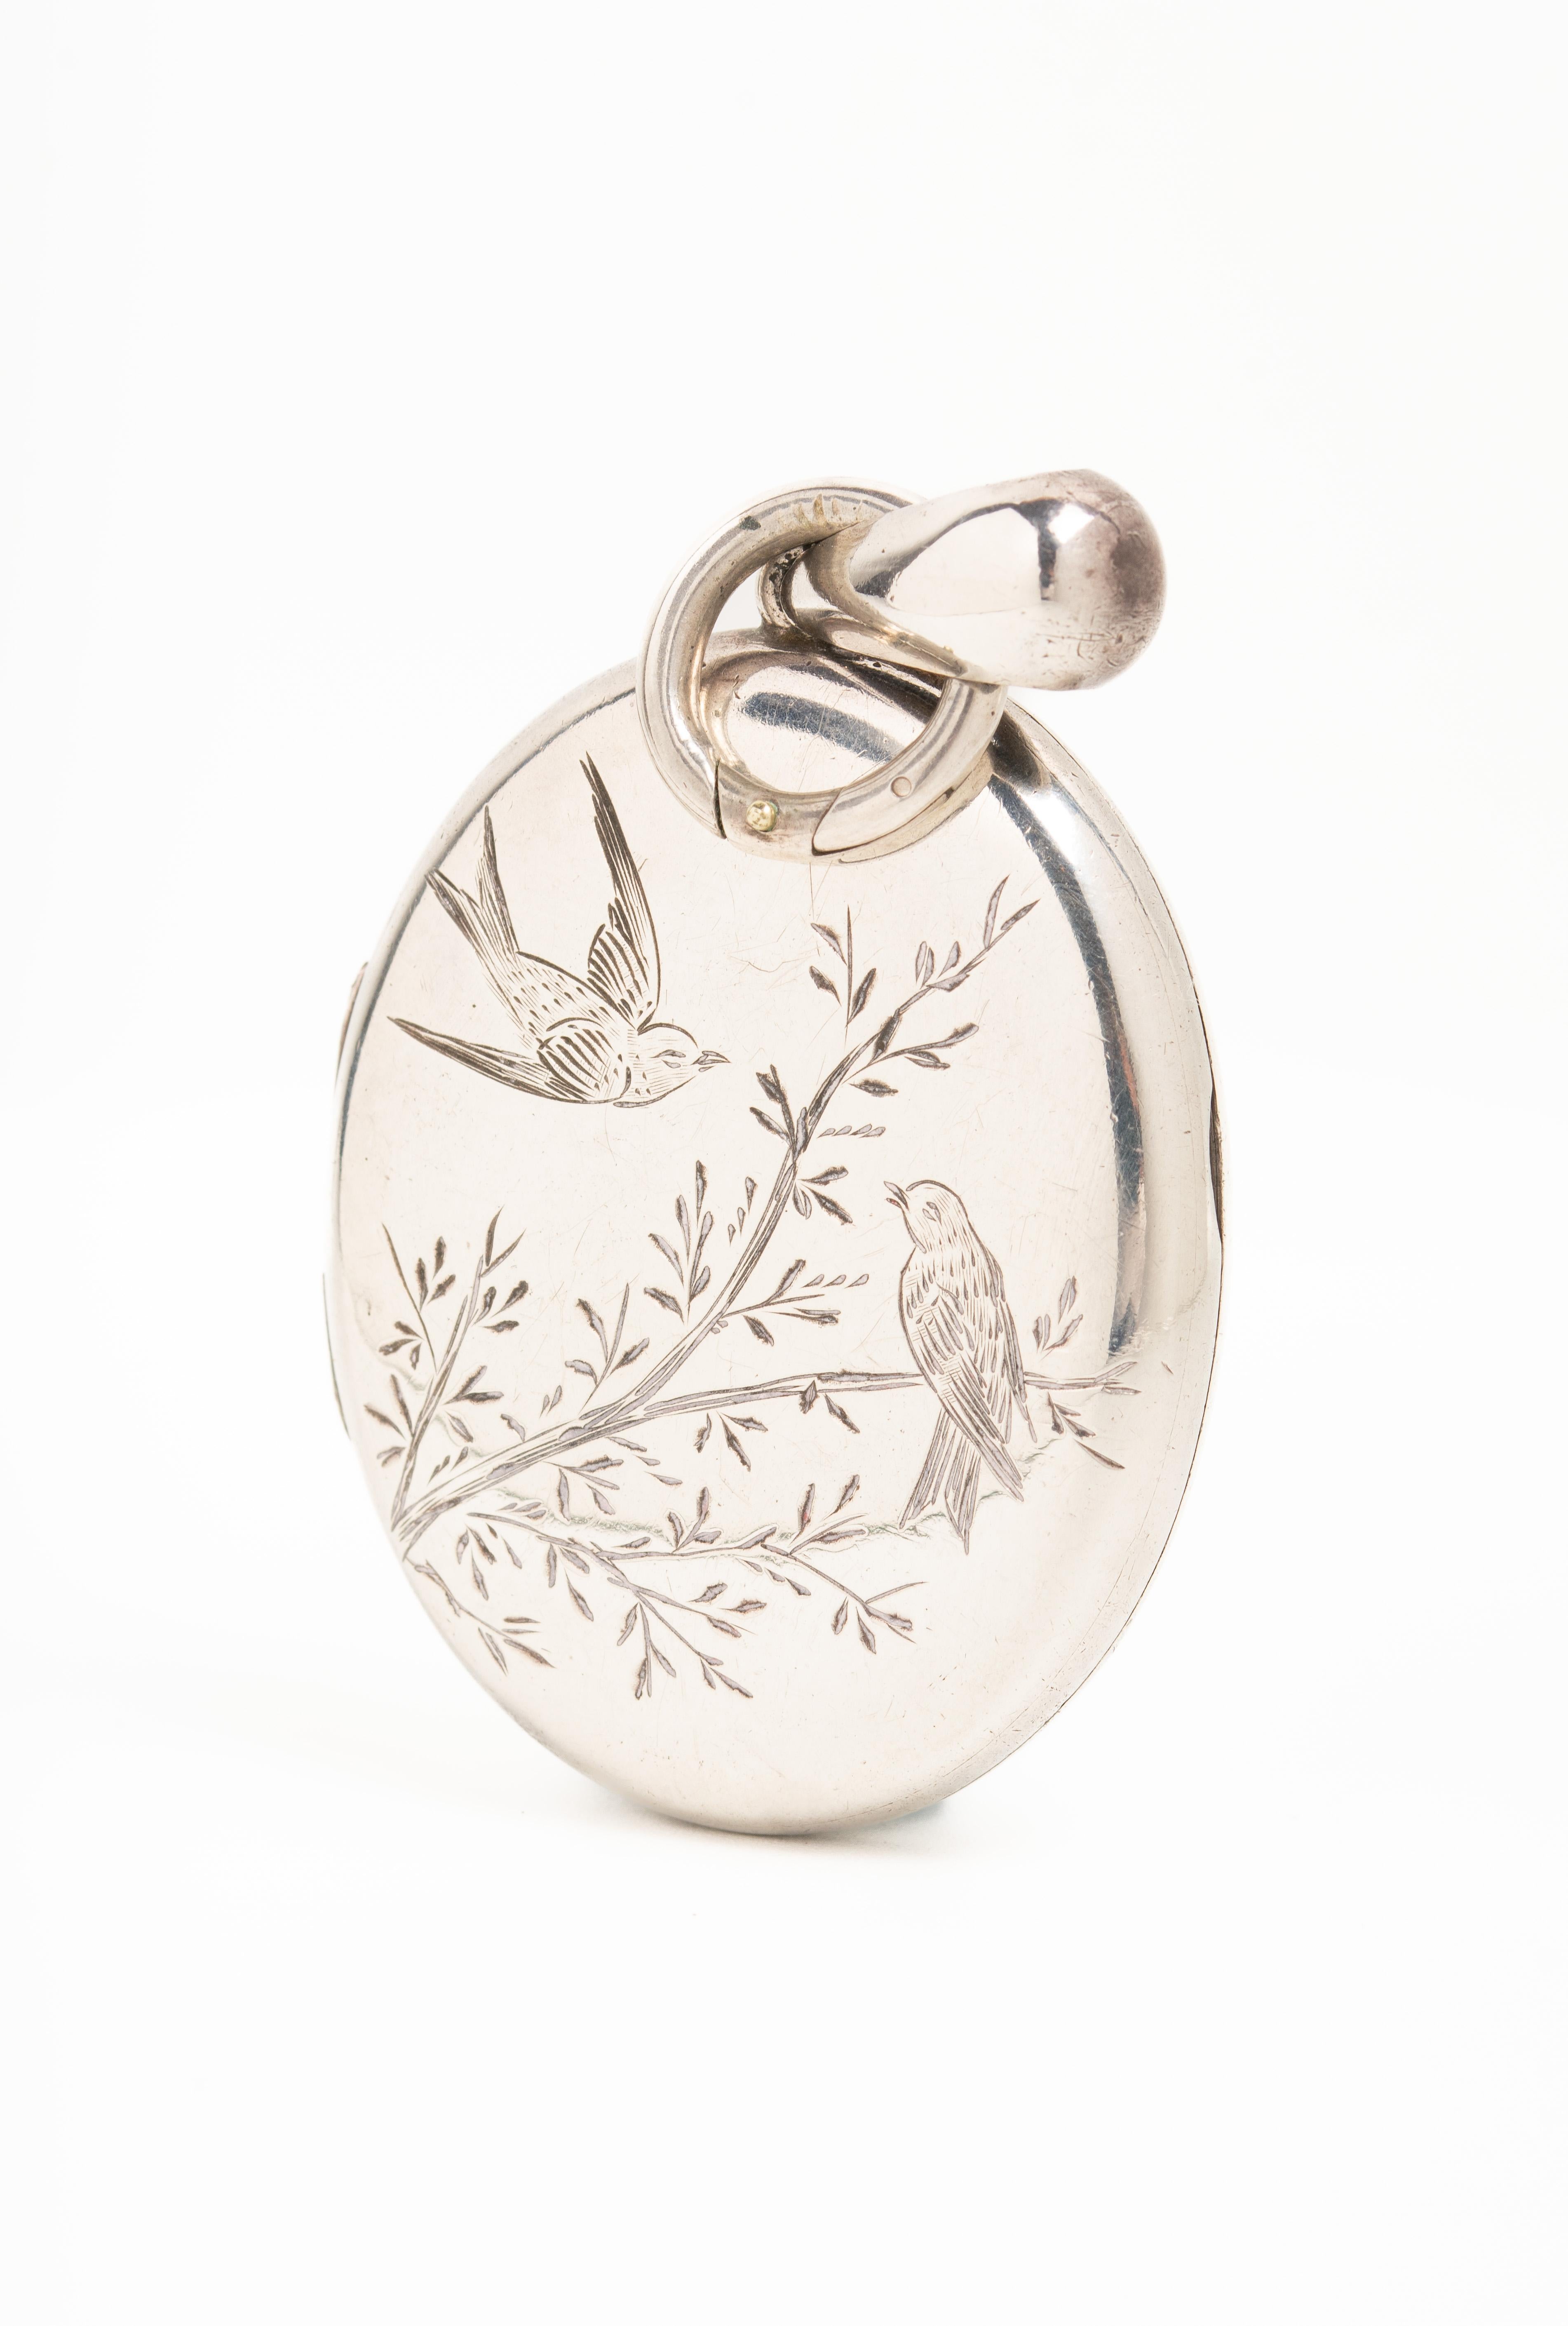 Antique Victorian silver photo locket with a typical for Aesthetic movement design. The front of this beautiful piece depicts a pair of swallow birds, one in a flight and another one sitting on the branch. The swallow was very popular in the